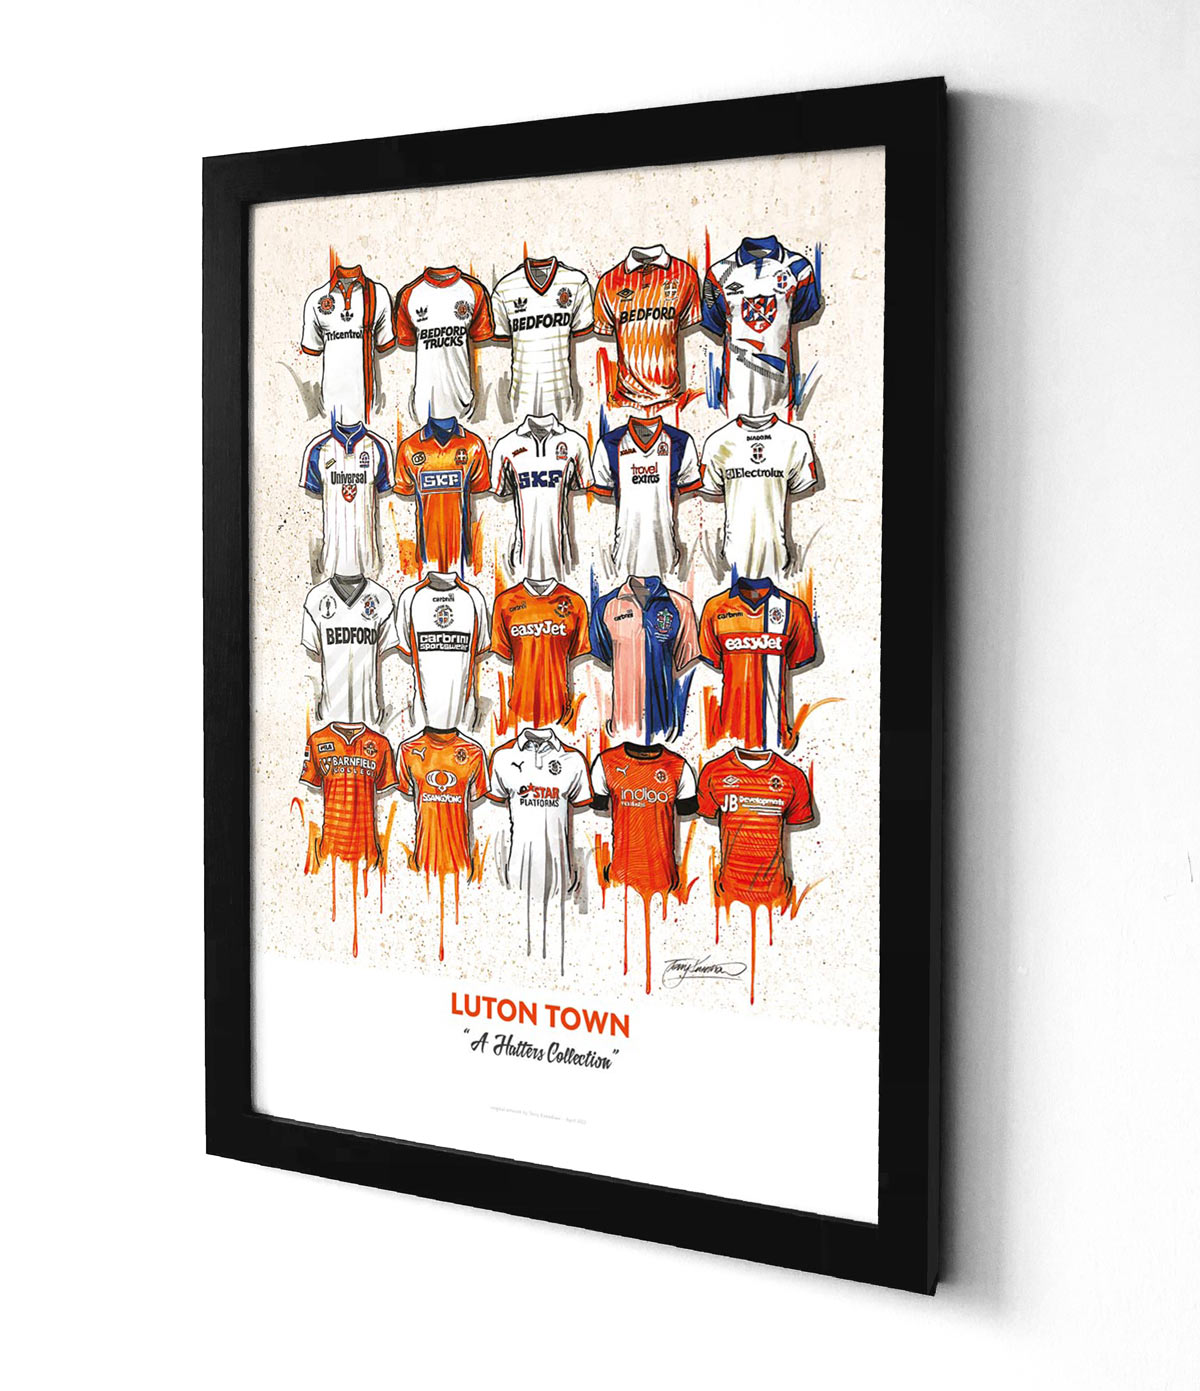 featuring 20 iconic jerseys from the team. The jerseys are arranged in a grid pattern, with the Luton FC crest at the centre. The jerseys feature different designs and colours, representing different eras of the team's history. The print is A2 size and is a limited edition print.